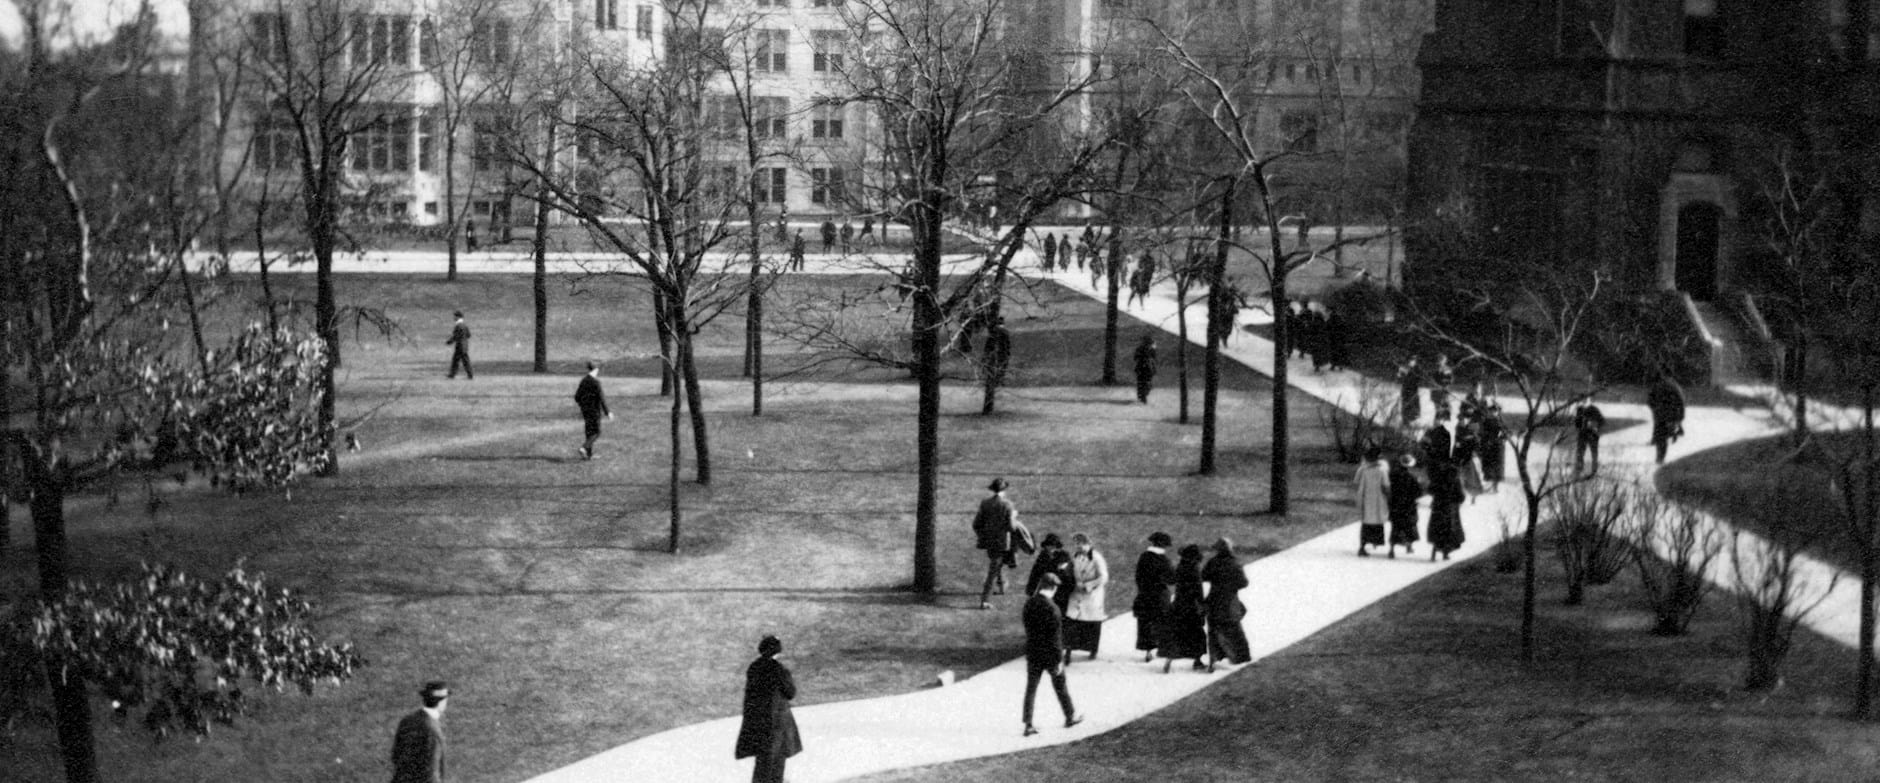 Students walking in the University of Chicago quadrangle